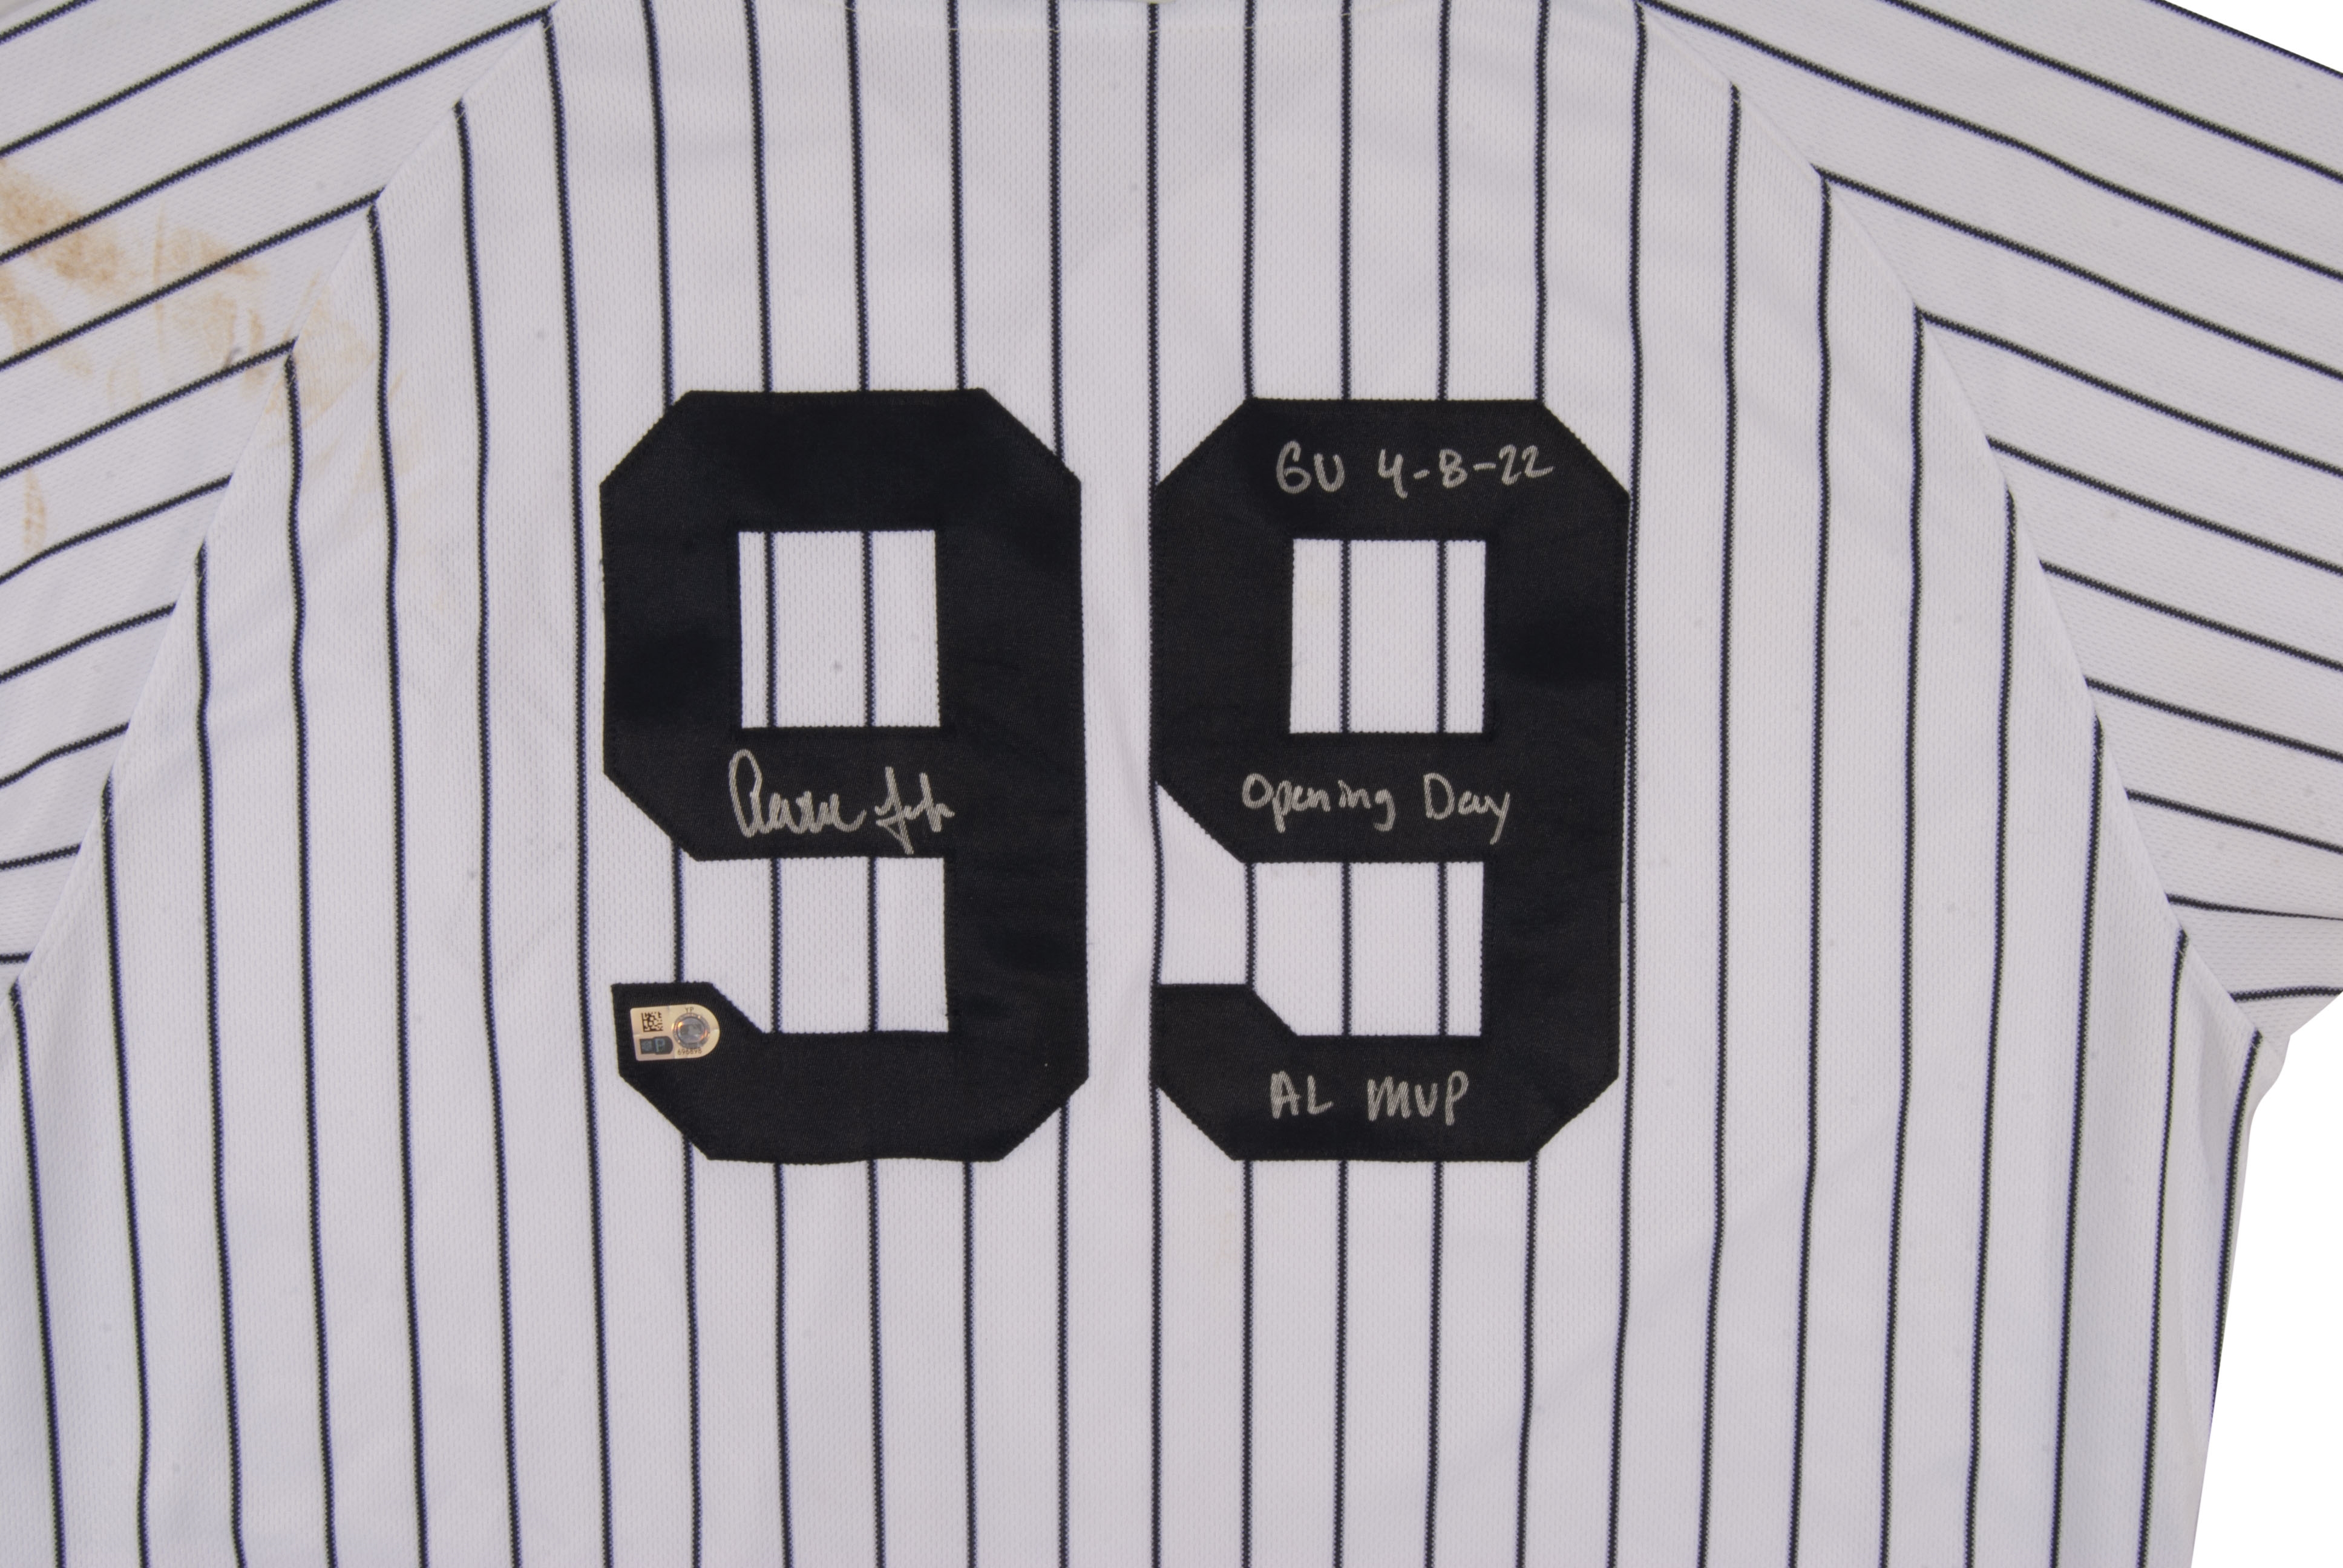 Yankees' Aaron Judge hits 62nd home run  How to get Aaron Judge jersey,  commemorative t-shirt, autograph after breaking Roger Maris' record 